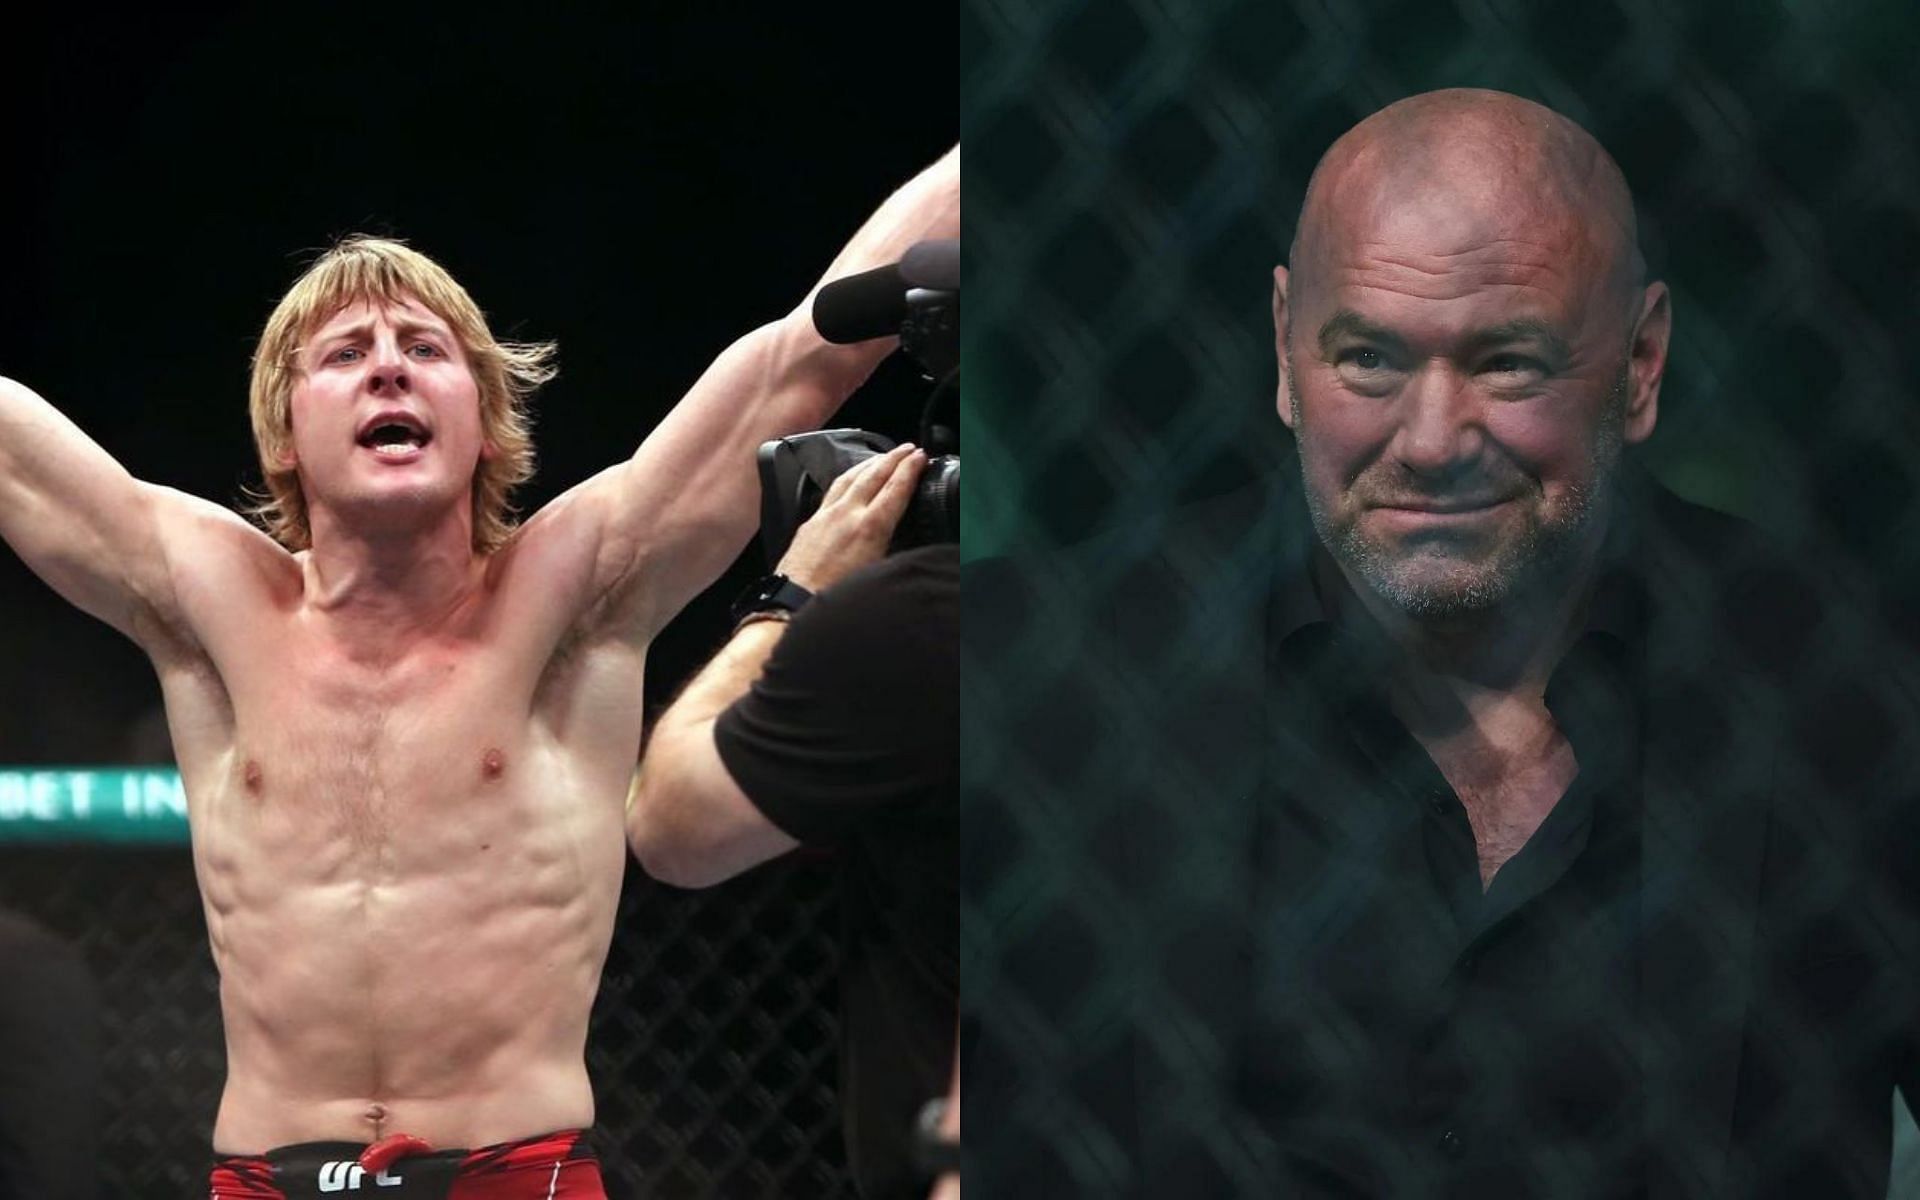 Paddy Pimblett (left) and Dana White (right) [Images courtesy of @theUFCbaddy and Getty]